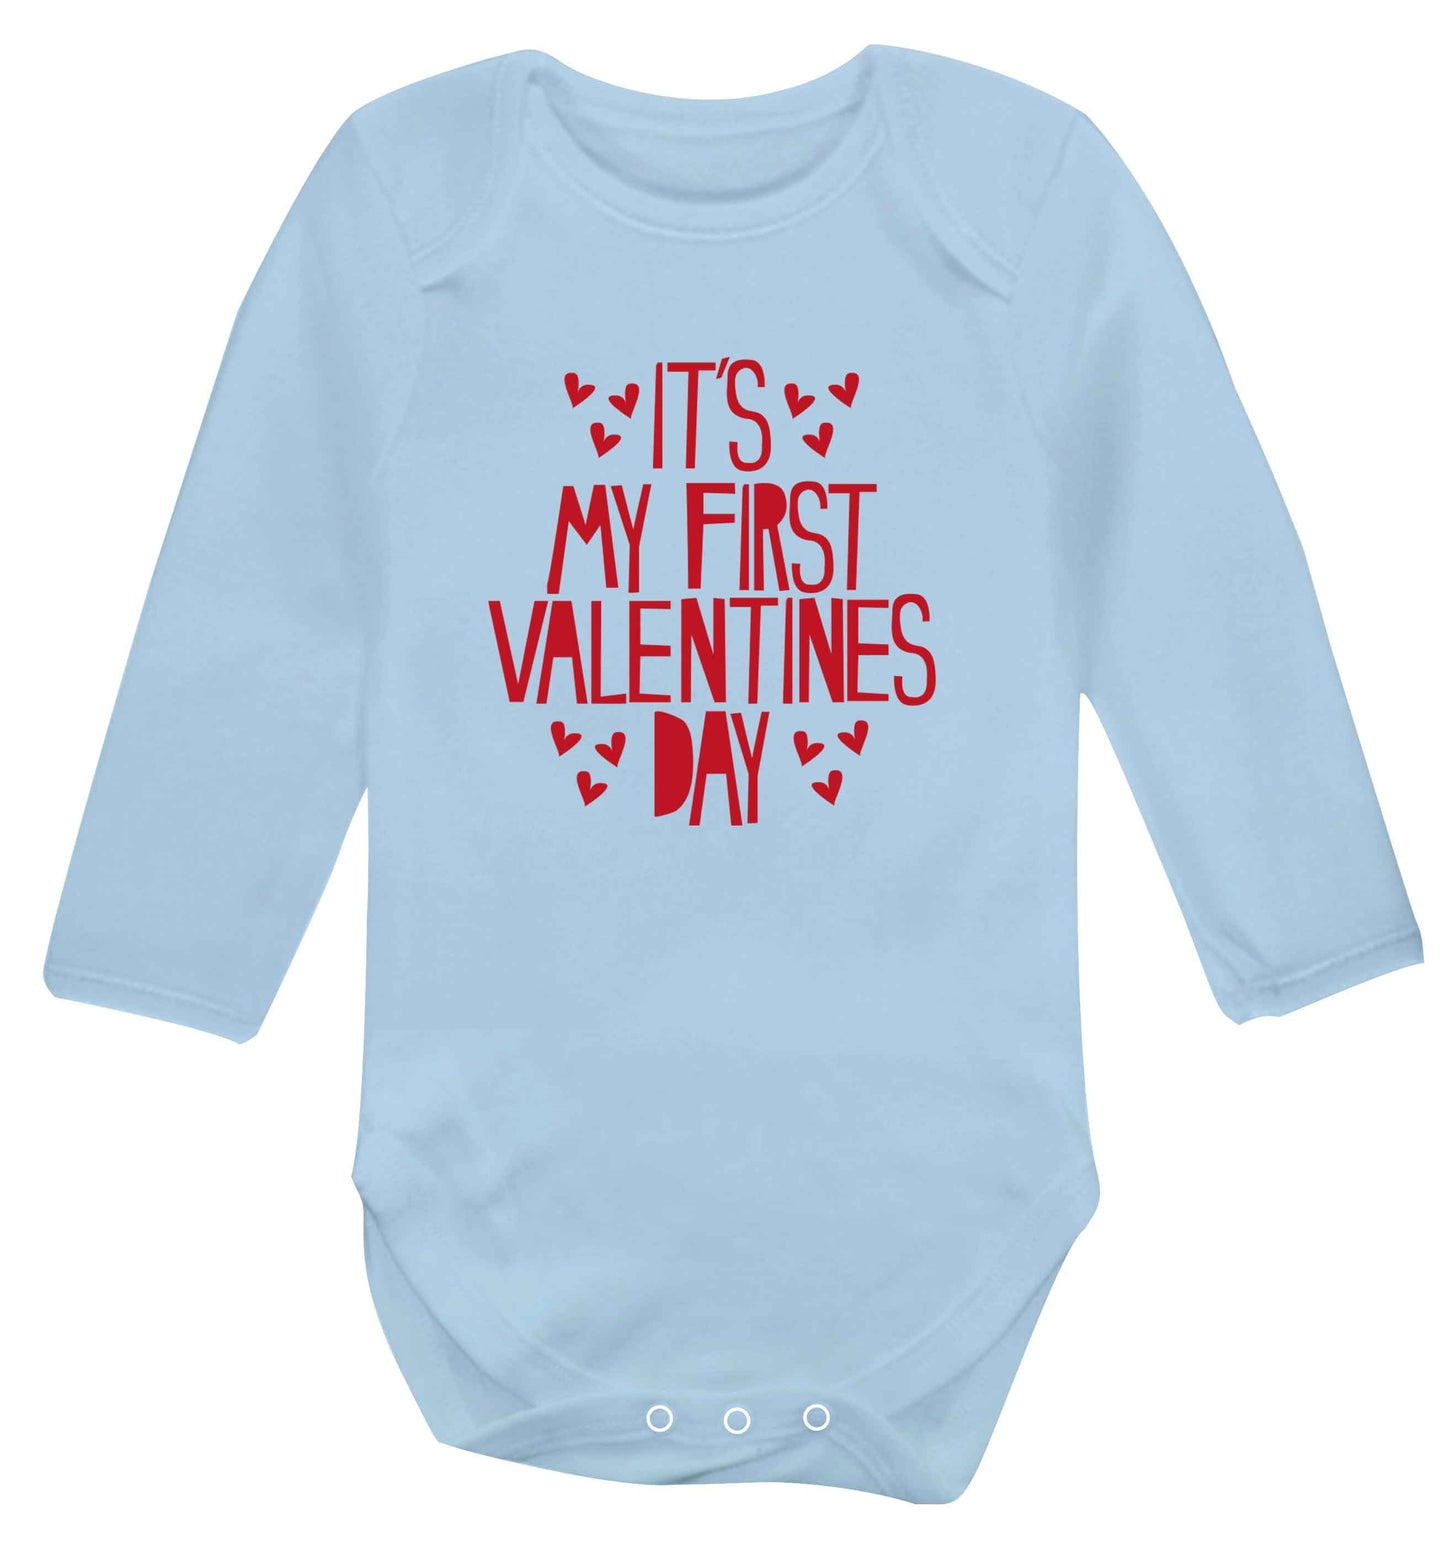 Hearts It's my First Valentine's Day baby vest long sleeved pale blue 6-12 months